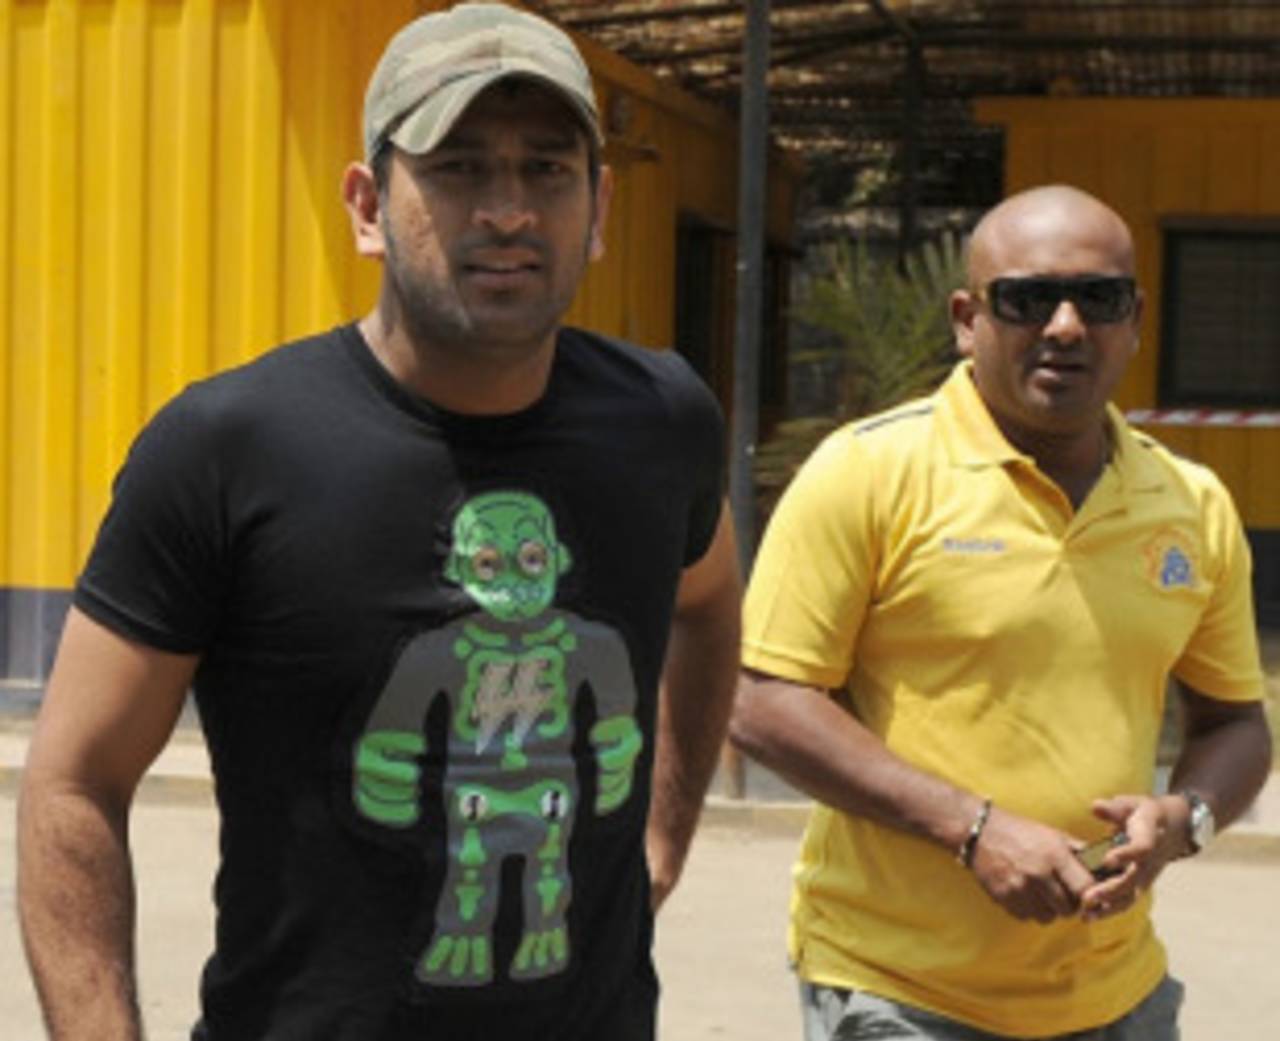 MS Dhoni arrives at the selection committee meeting to pick India's team for the World Twenty20, Mumbai, March 26, 2010